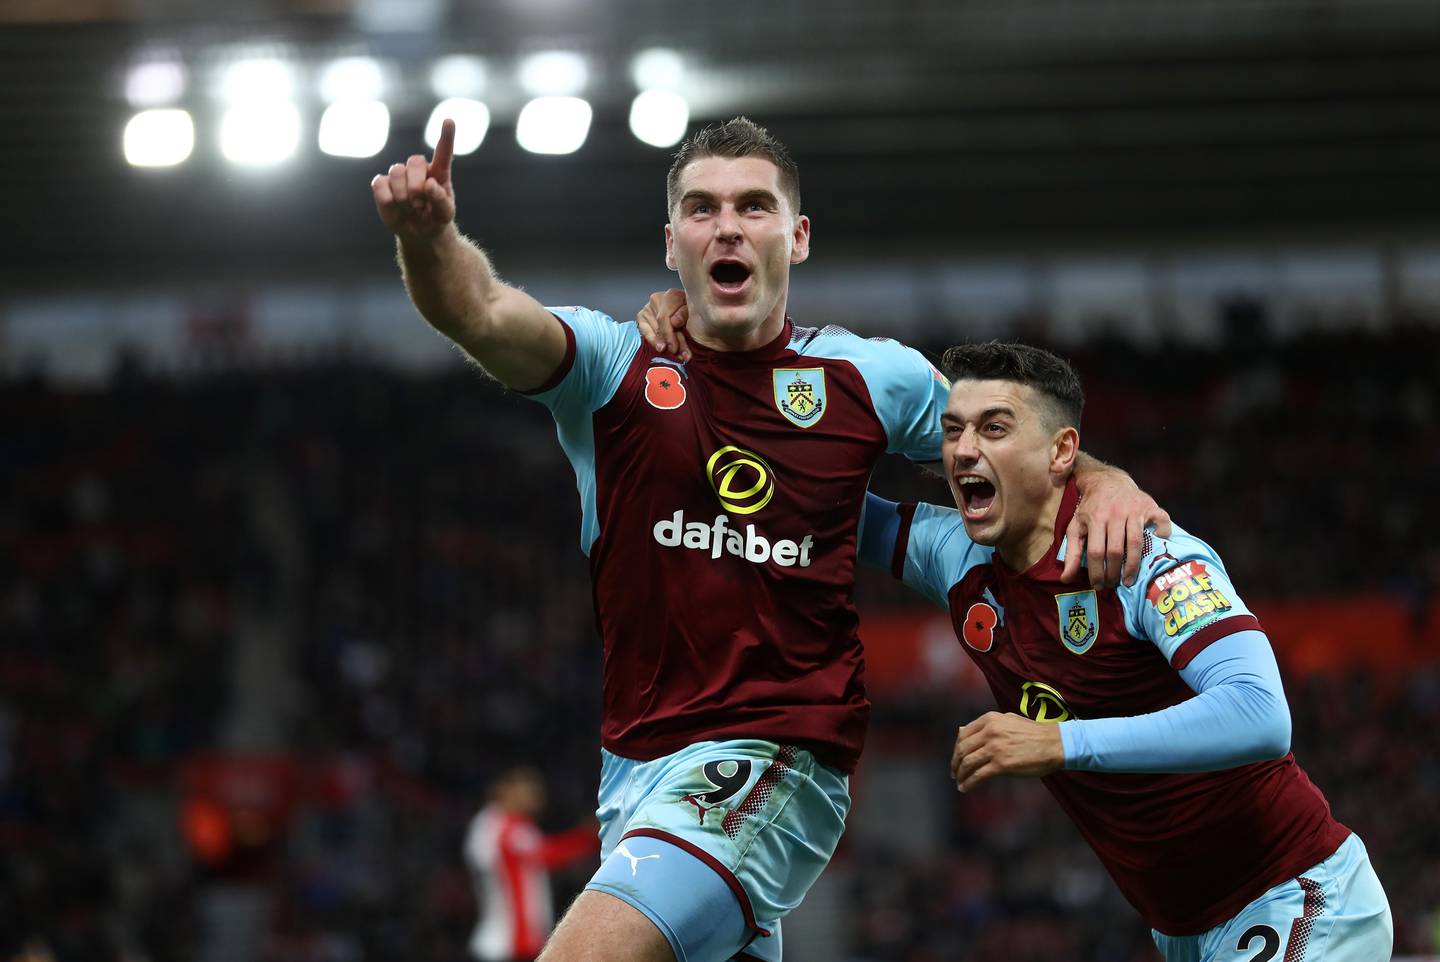 SOUTHAMPTON, ENGLAND - NOVEMBER 04:  Sam Vokes celebrates scoring his side's first goal with Matthew Lowton of Burnley during the Premier League match between Southampton and Burnley at St Mary's Stadium on November 4, 2017 in Southampton, England.  (Photo by Bryn Lennon/Getty Images)